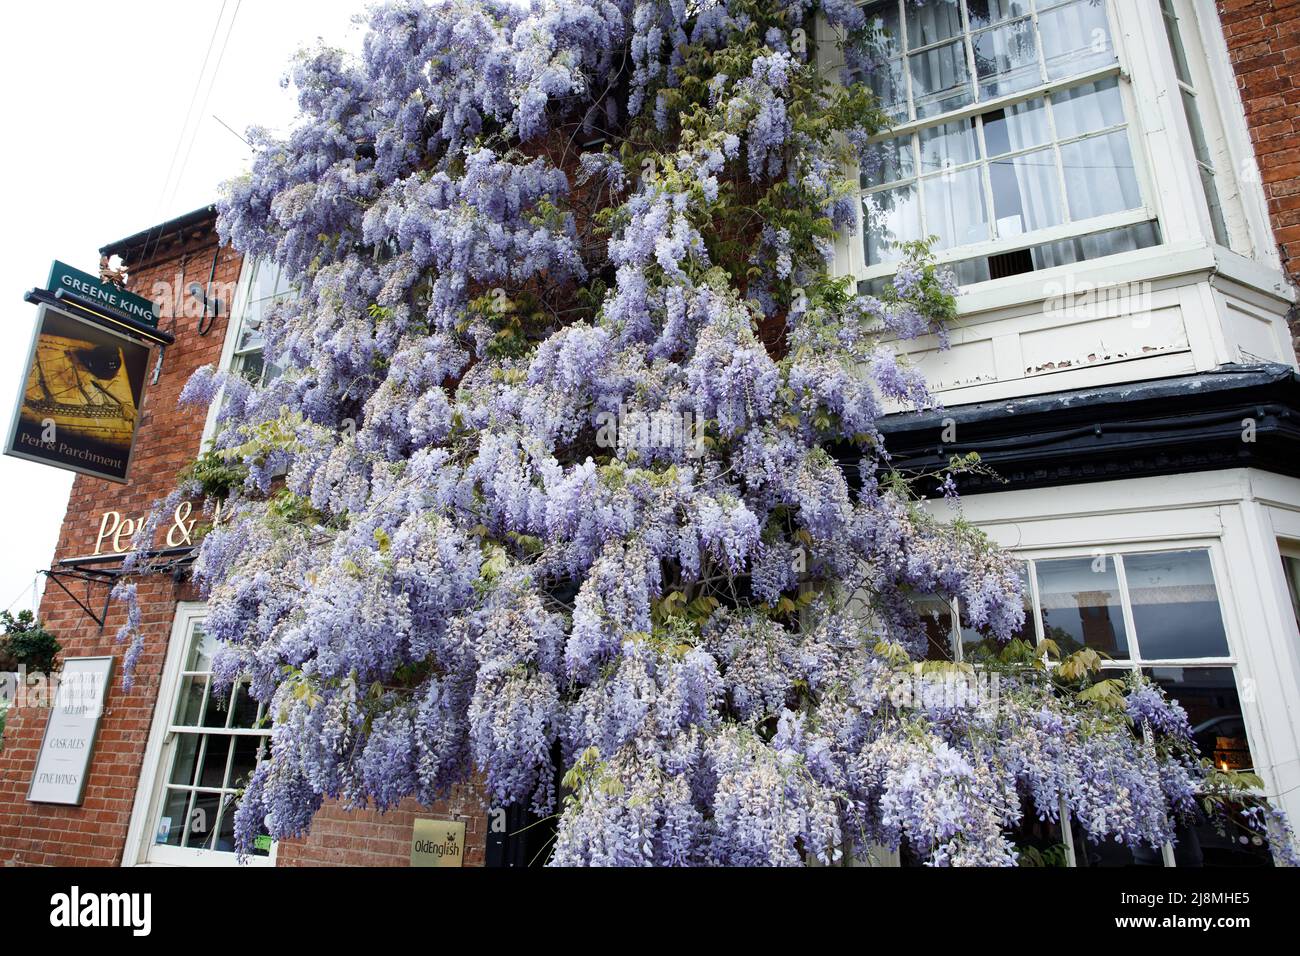 A huge wisteria covering the frontage of the Pen and Parchment public house in the centre of Stratford upon Avon. The public house sits opposite the Royal Shakespeare Theatre near the river. It is a Greene King pub. Stock Photo